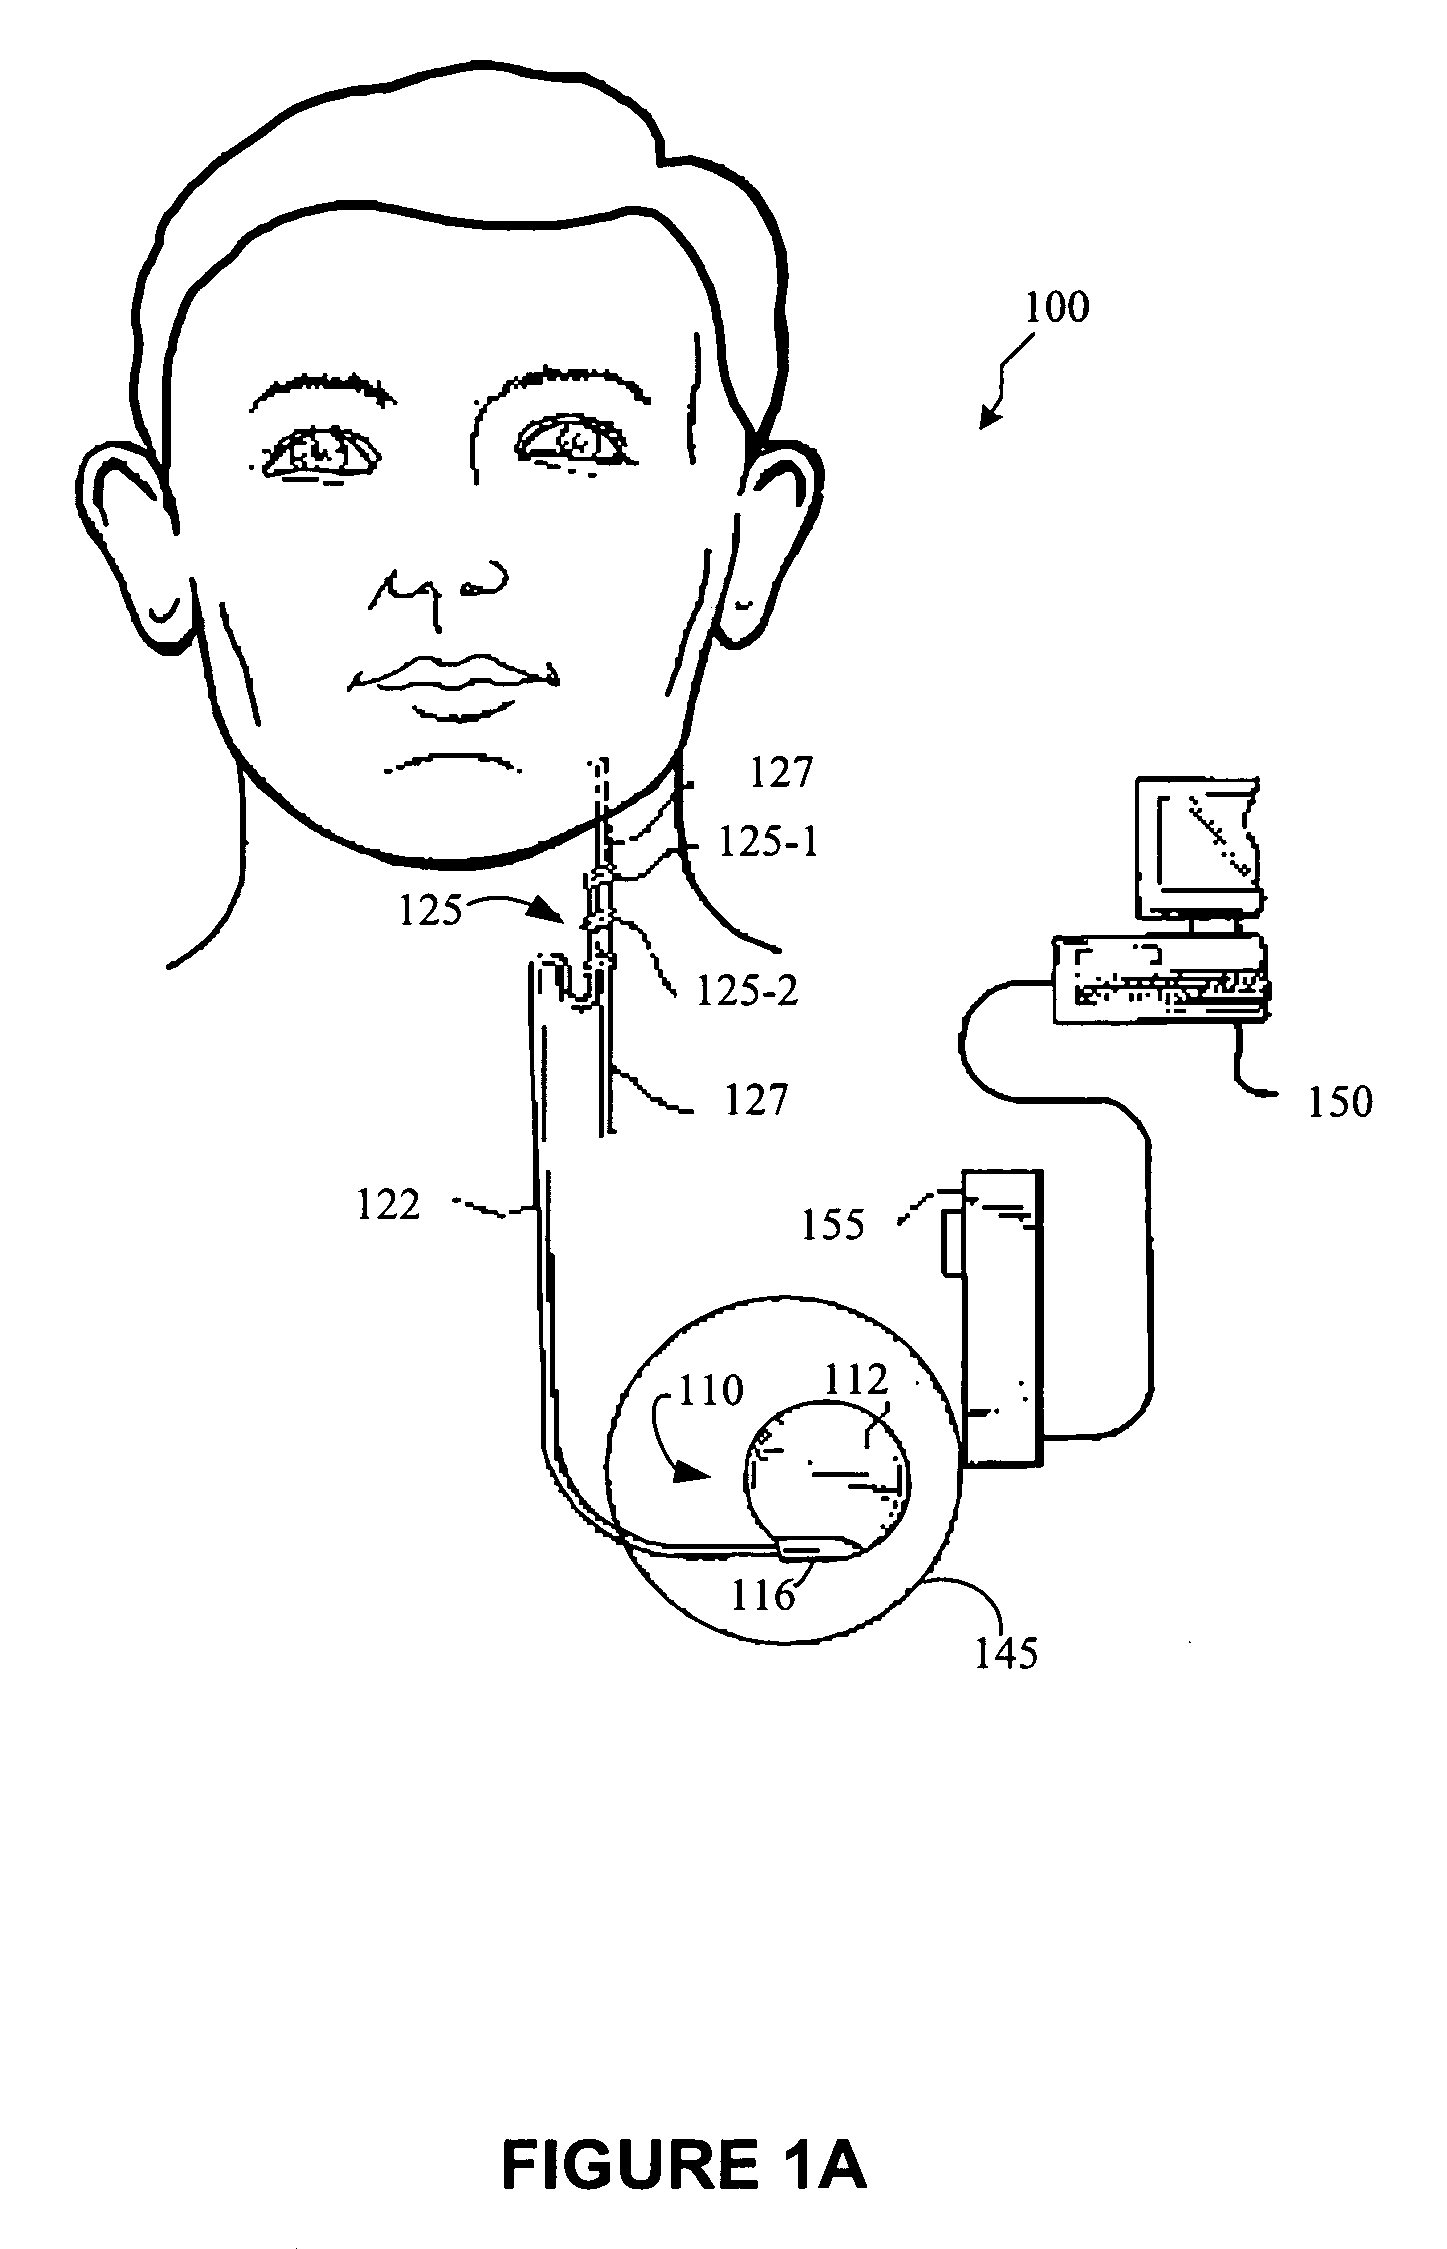 Changeable electrode polarity stimulation by an implantable medical device